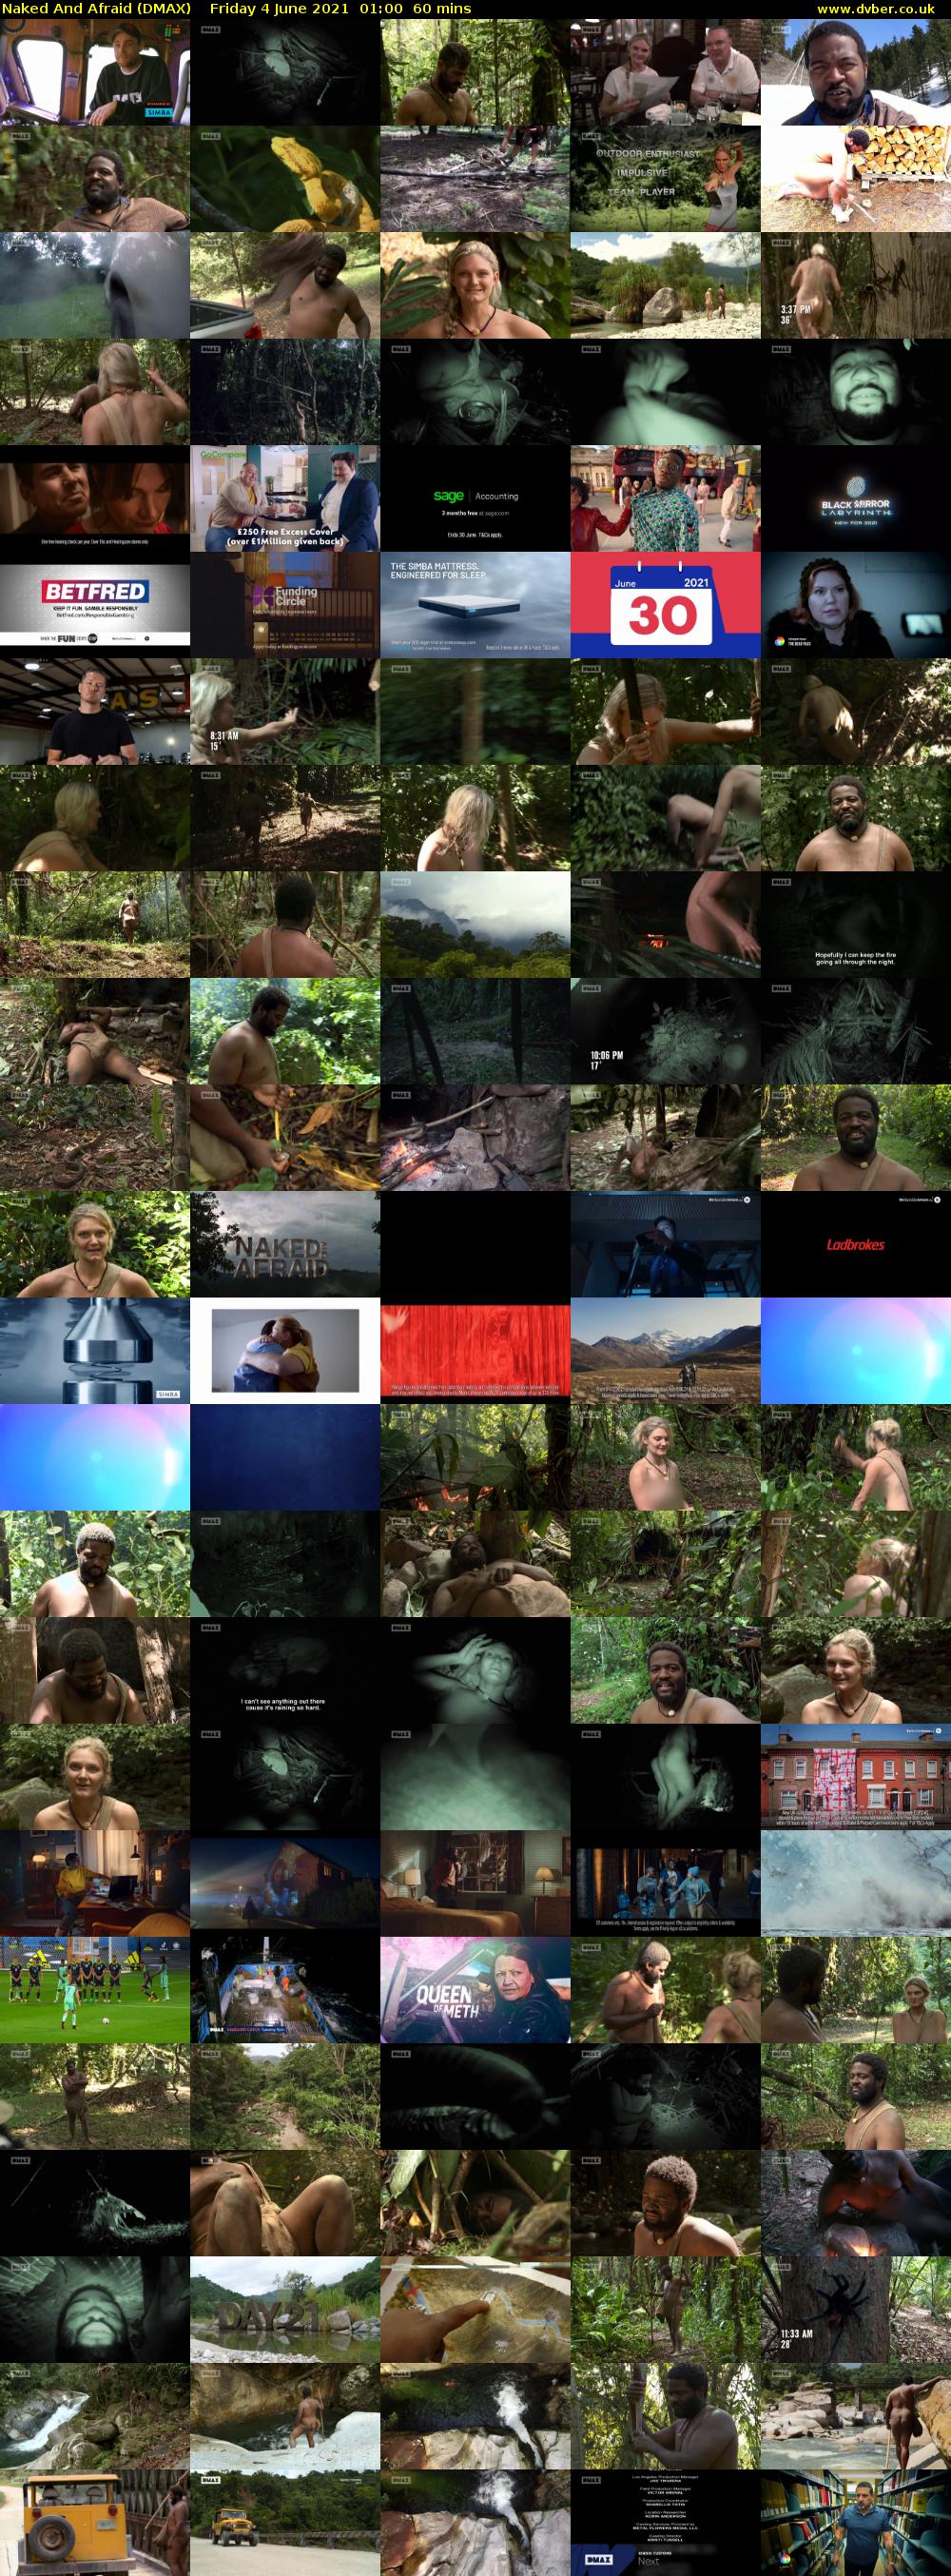 Naked And Afraid (DMAX) Friday 4 June 2021 01:00 - 02:00